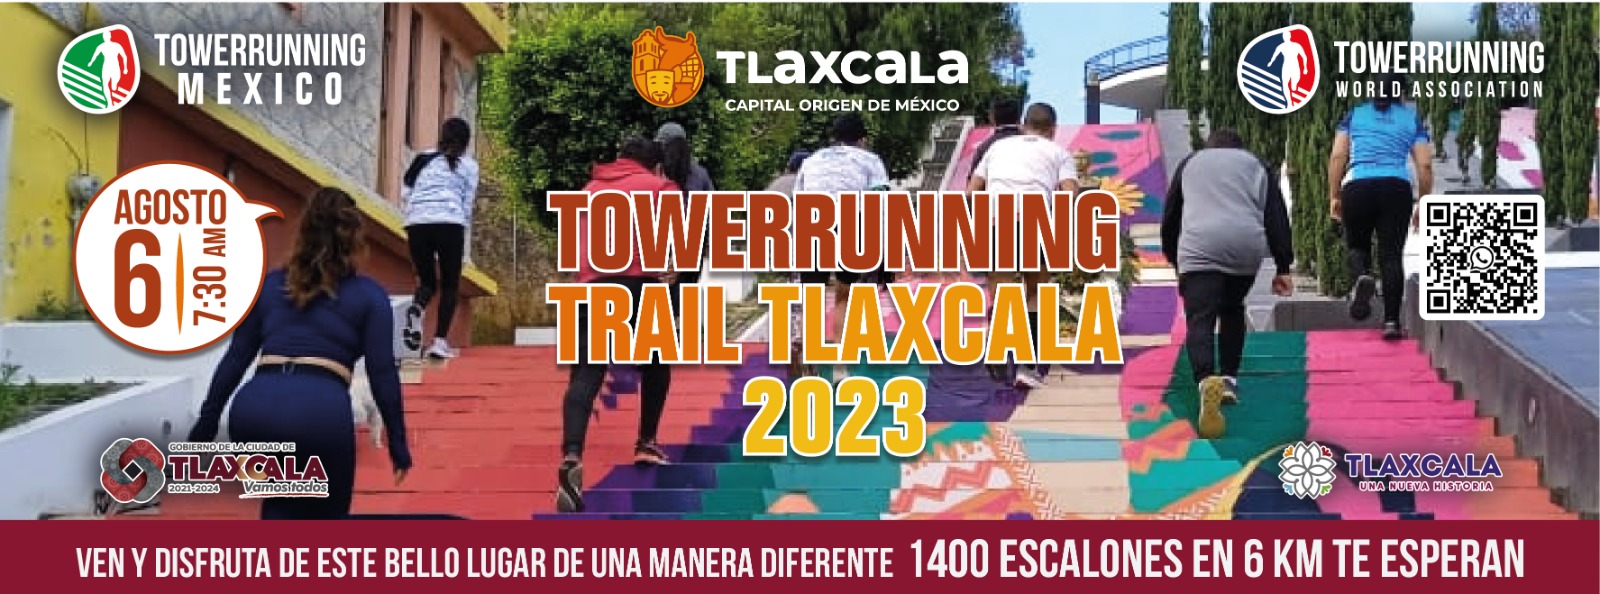 banner Tlaxcala-2023